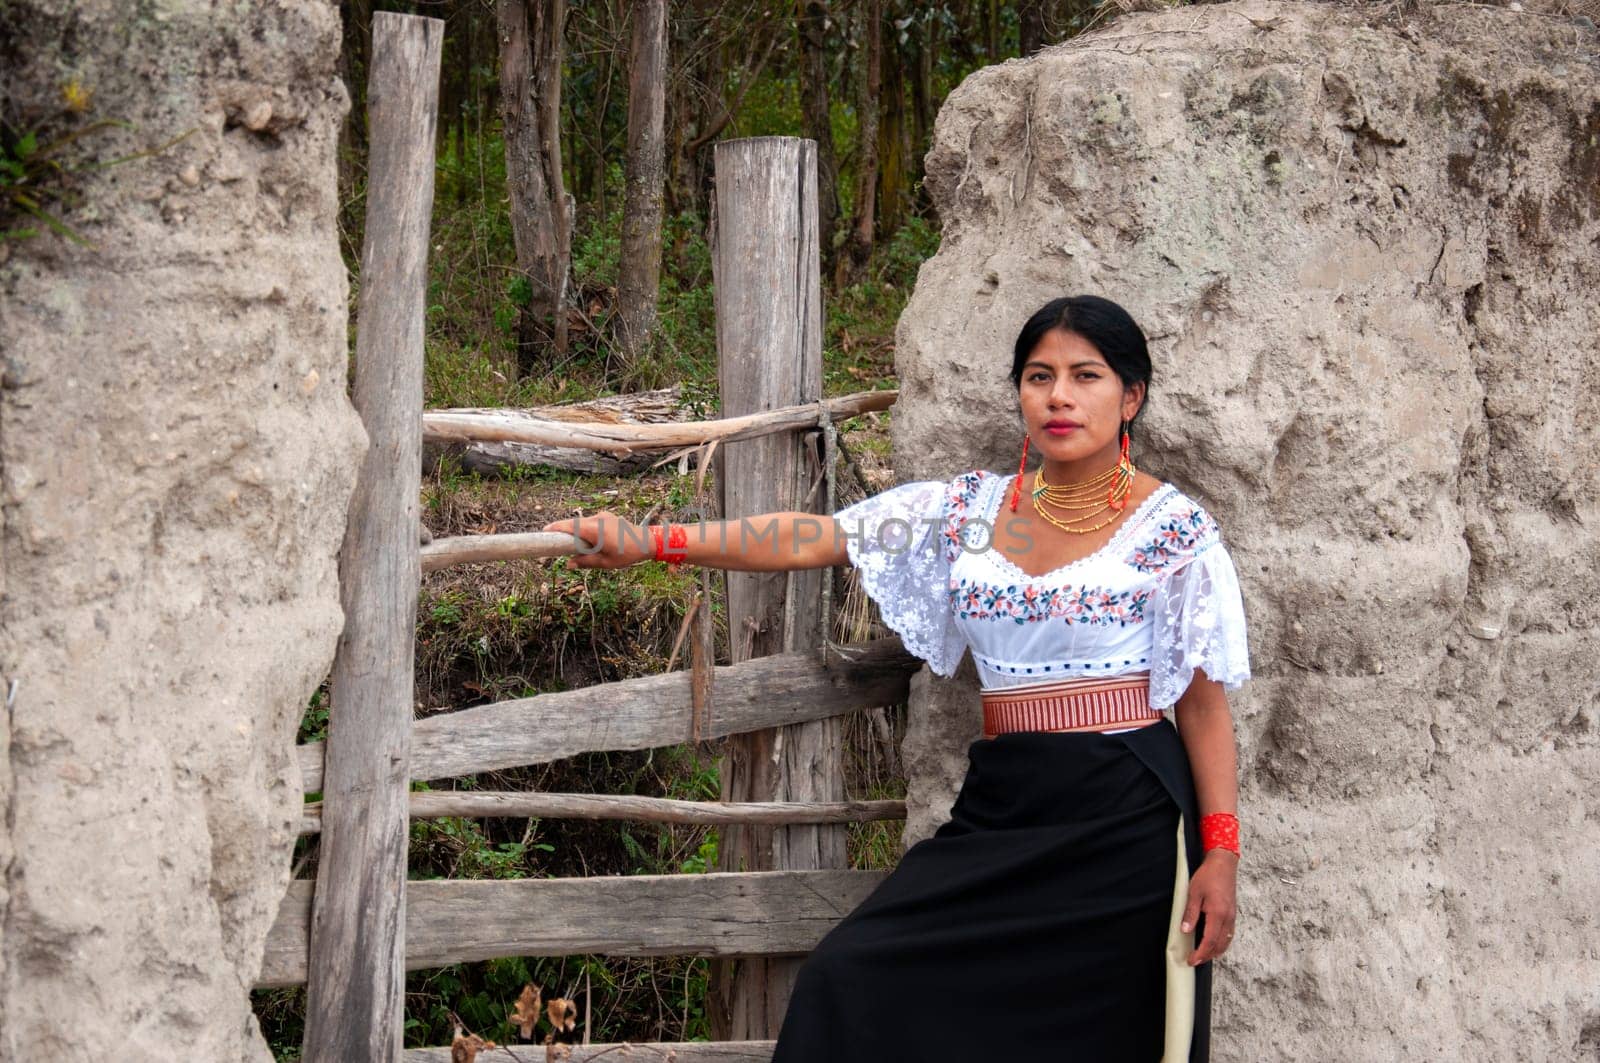 indigenous woman at the door of her house wearing traditional dress of her ecuadorian culture by Raulmartin